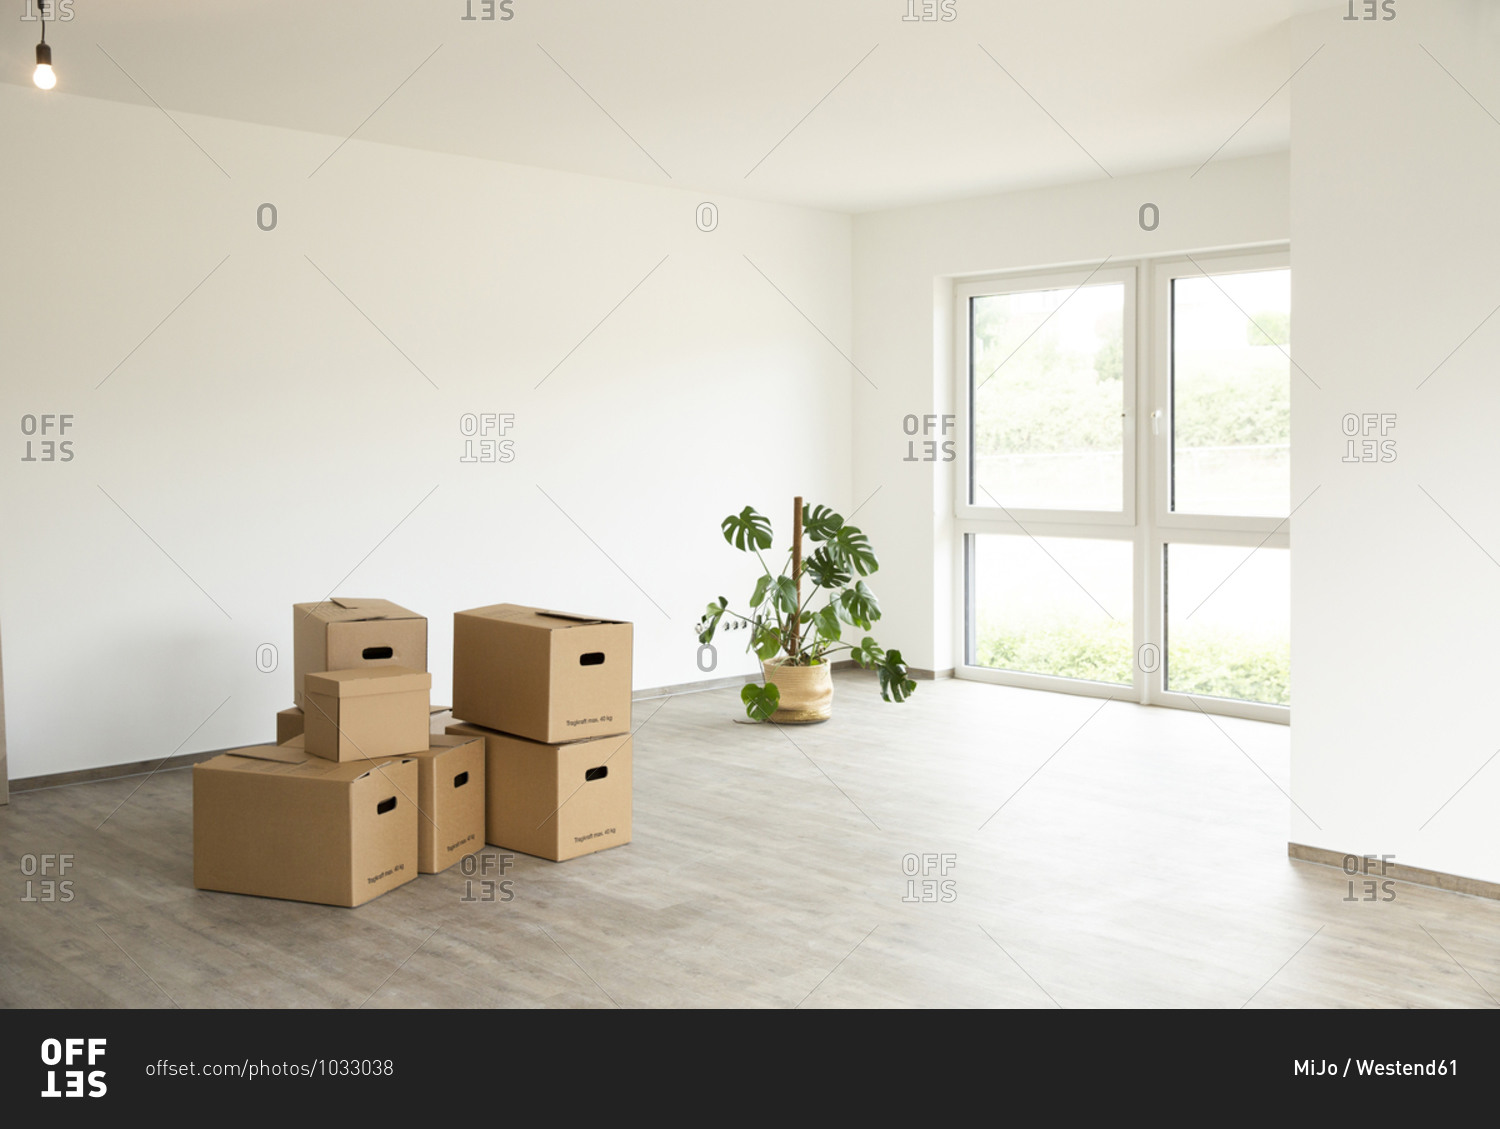 Cardboard boxes with monstera deliciosa on floor against white wall in new house